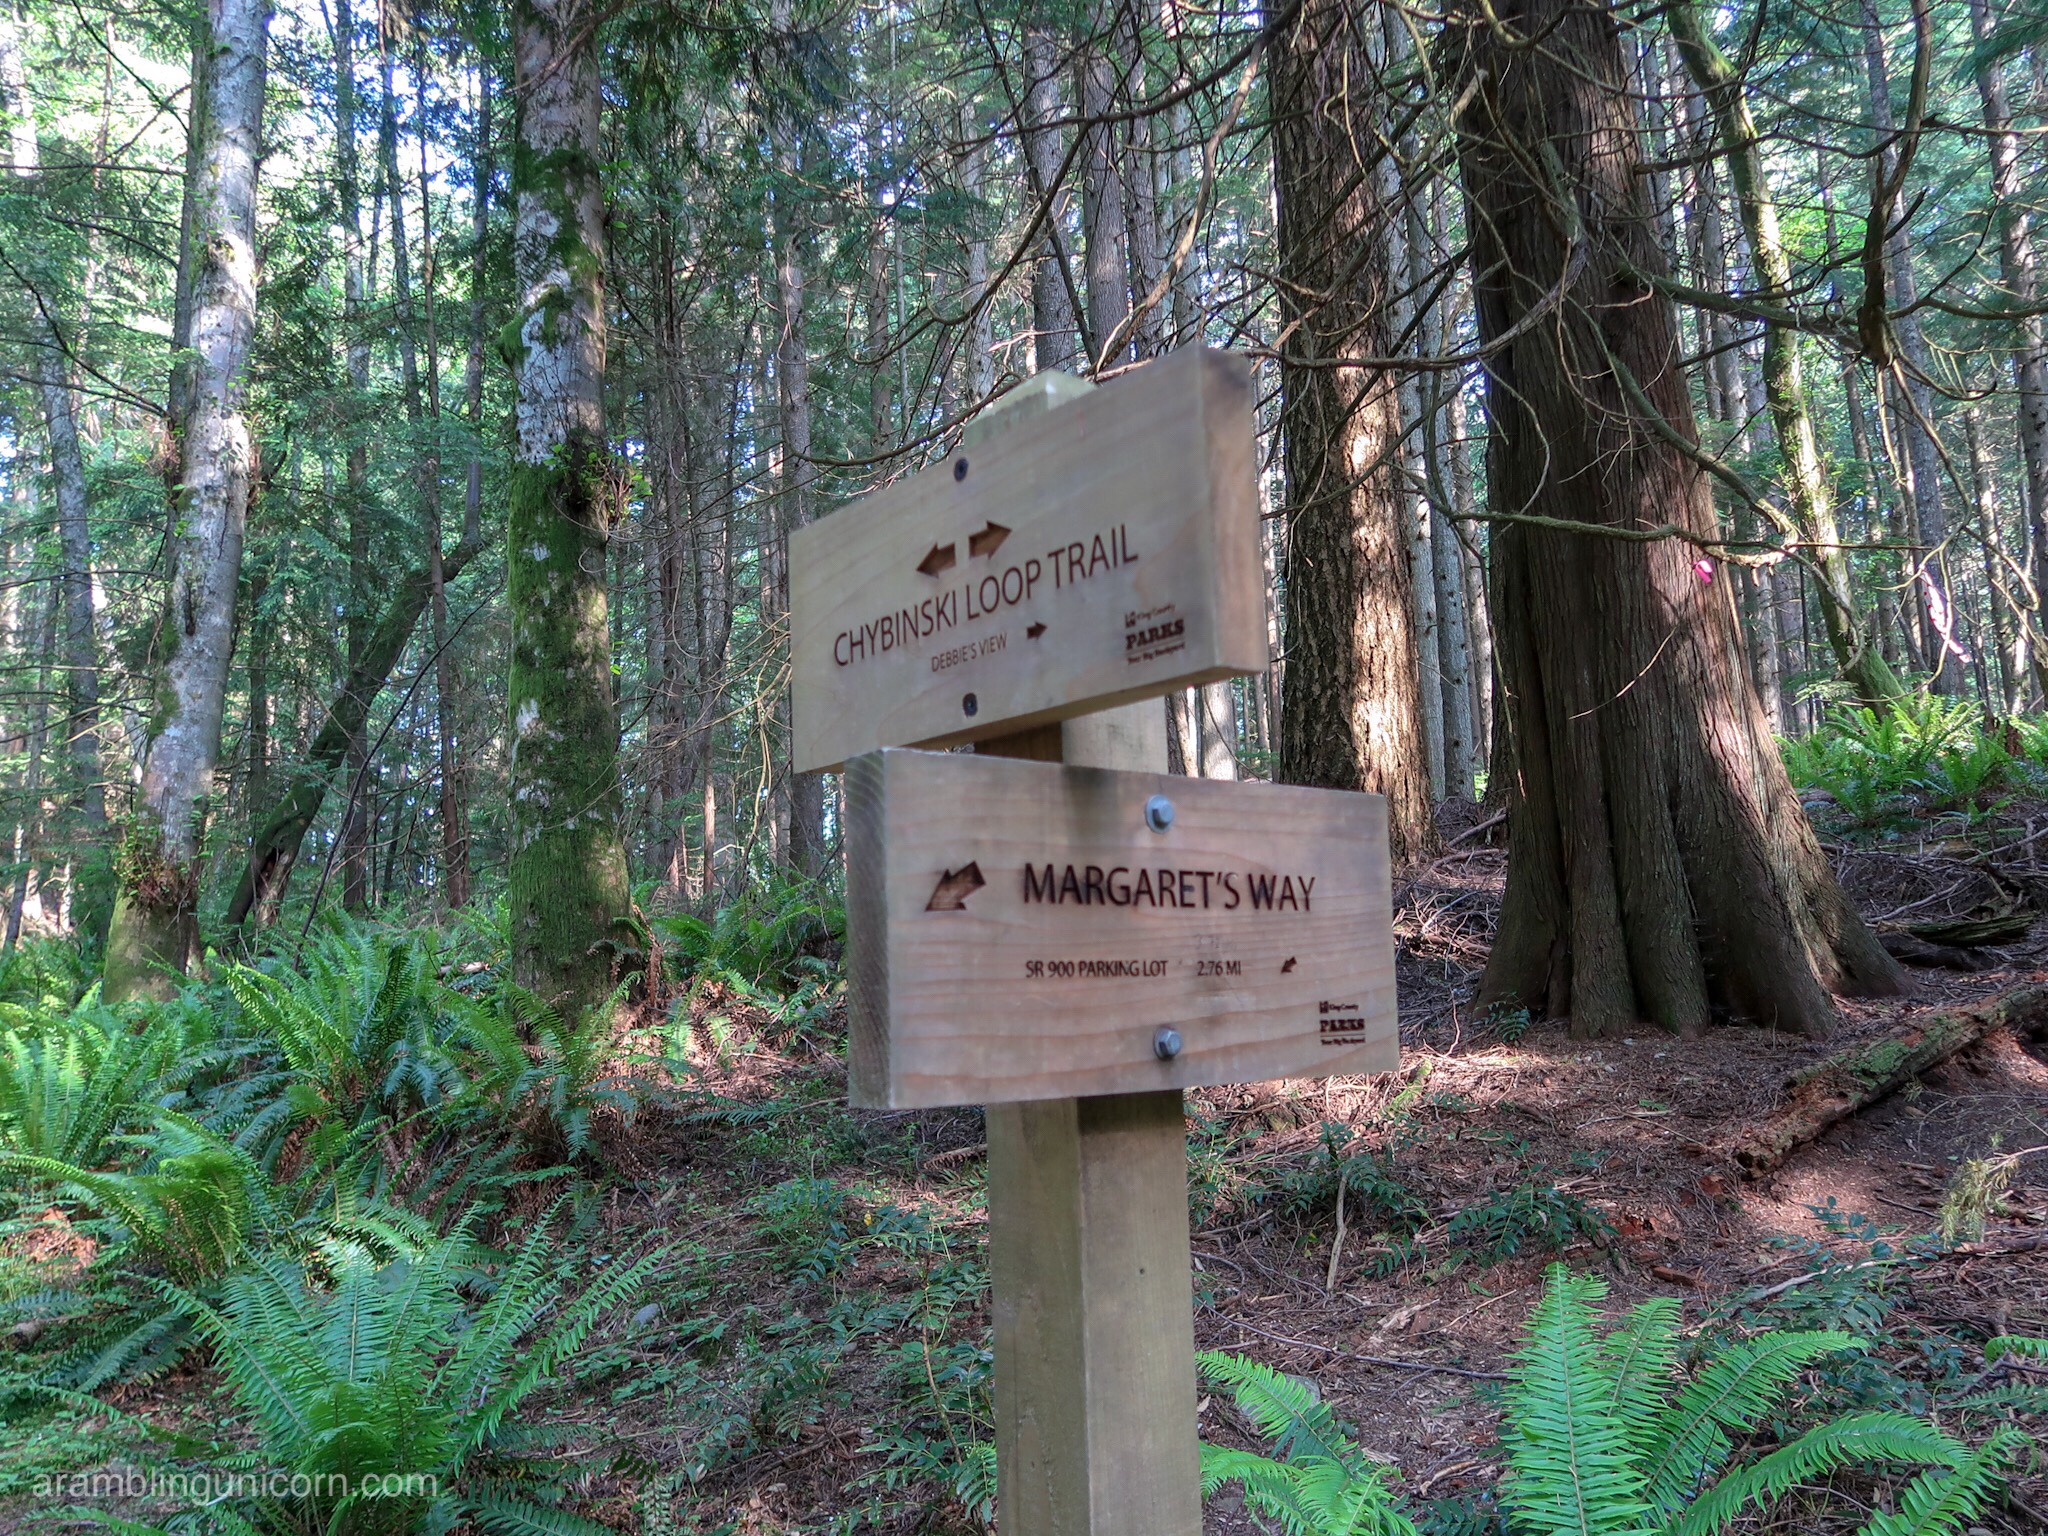 Intersection of the Margaret's Way Trail with Chybinski Loop Trail